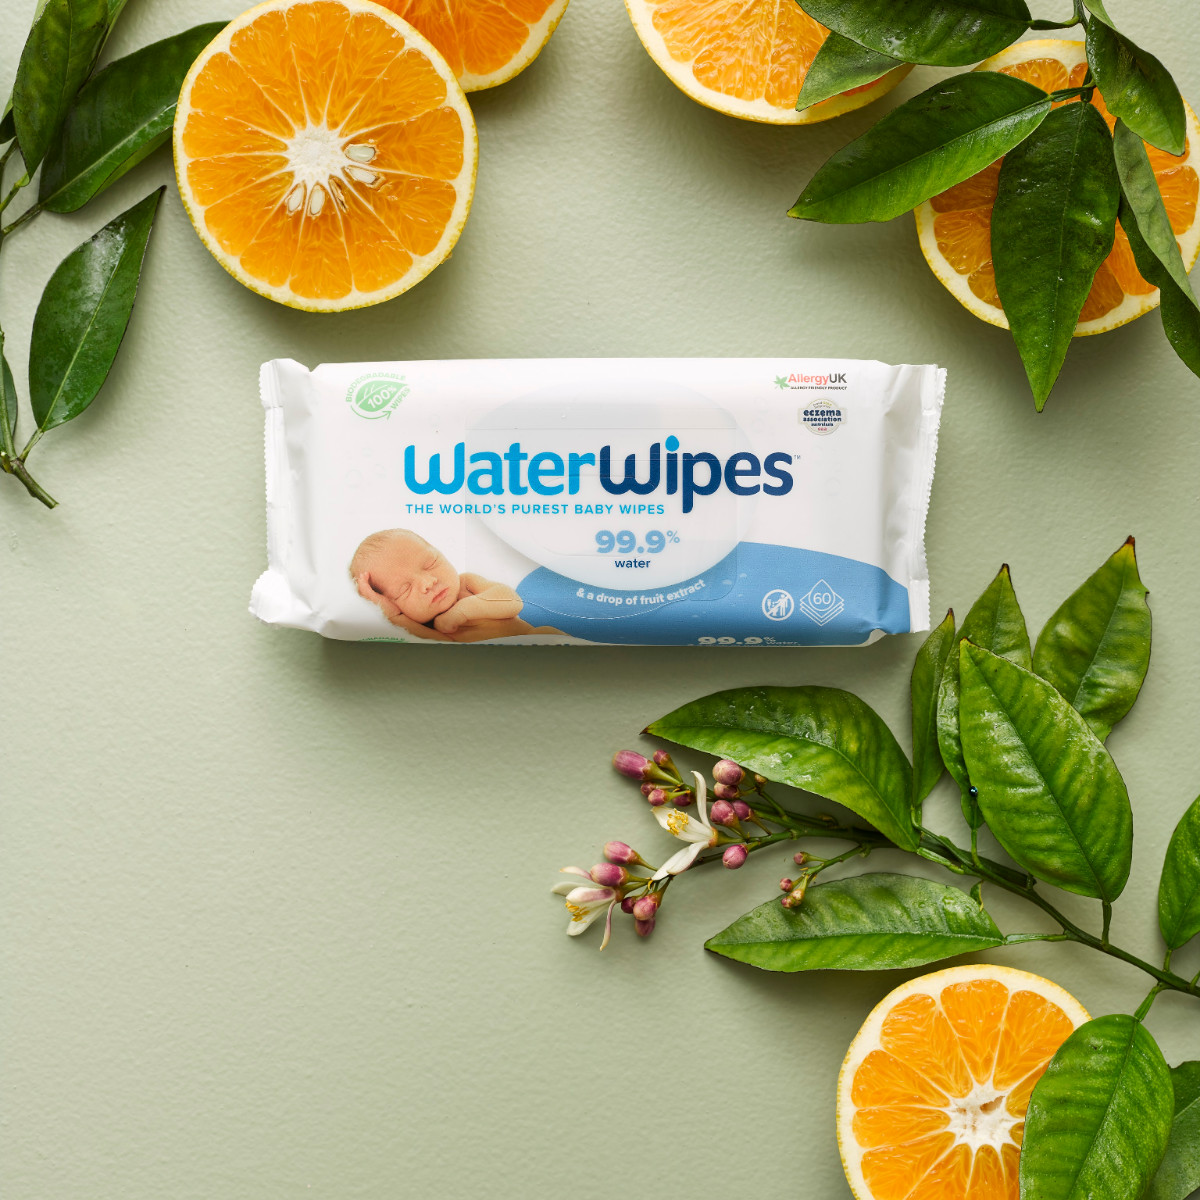 WaterWipes ad claiming to be 'world's purest' deemed misleading by ASA